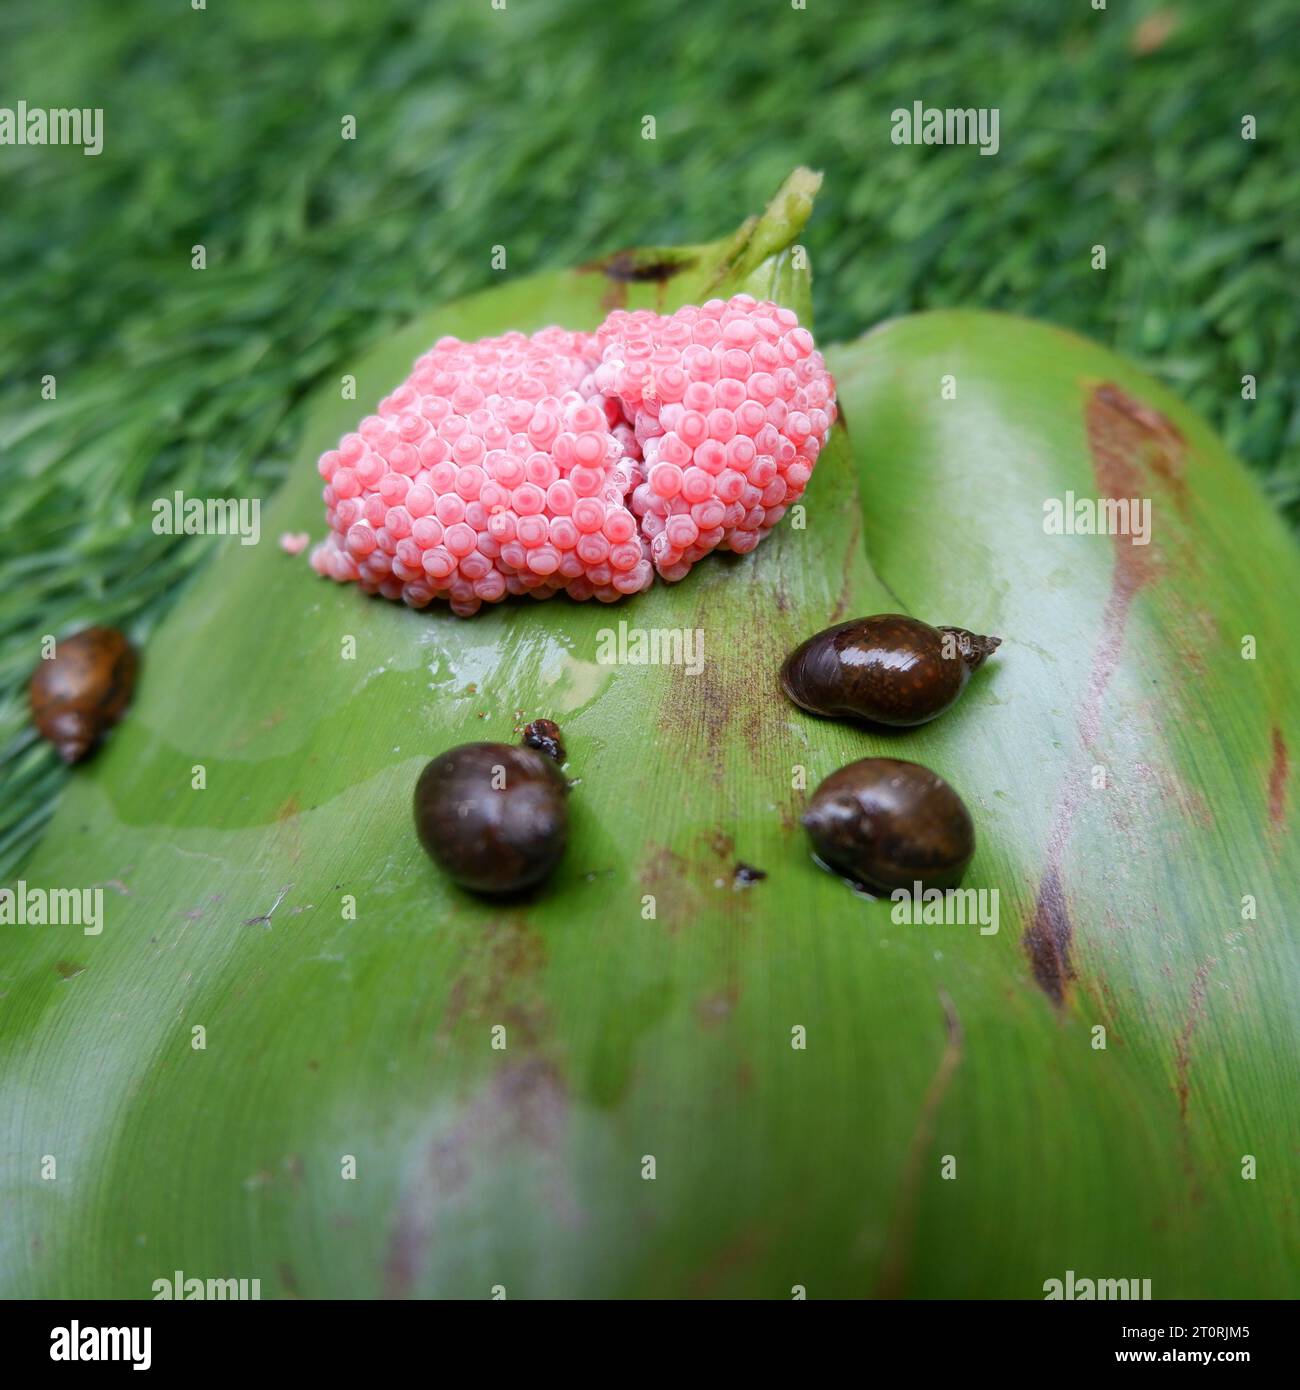 Pink eggs of snails with some of its juvenile snails Stock Photo